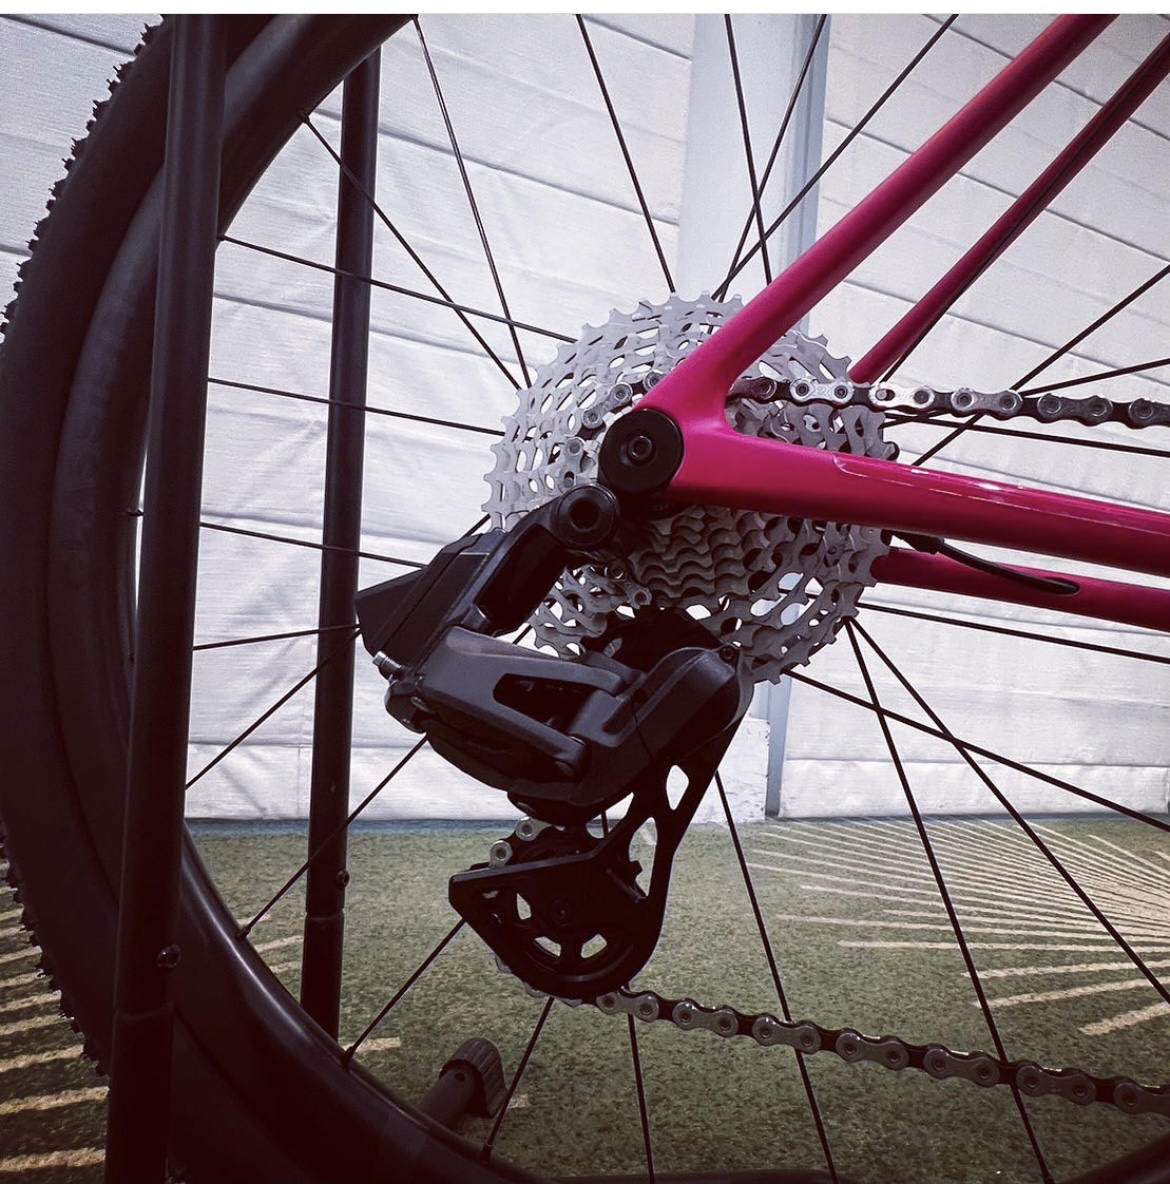 The photo shows a view of the new Classified and TRP-developed electronic rear derailleur.